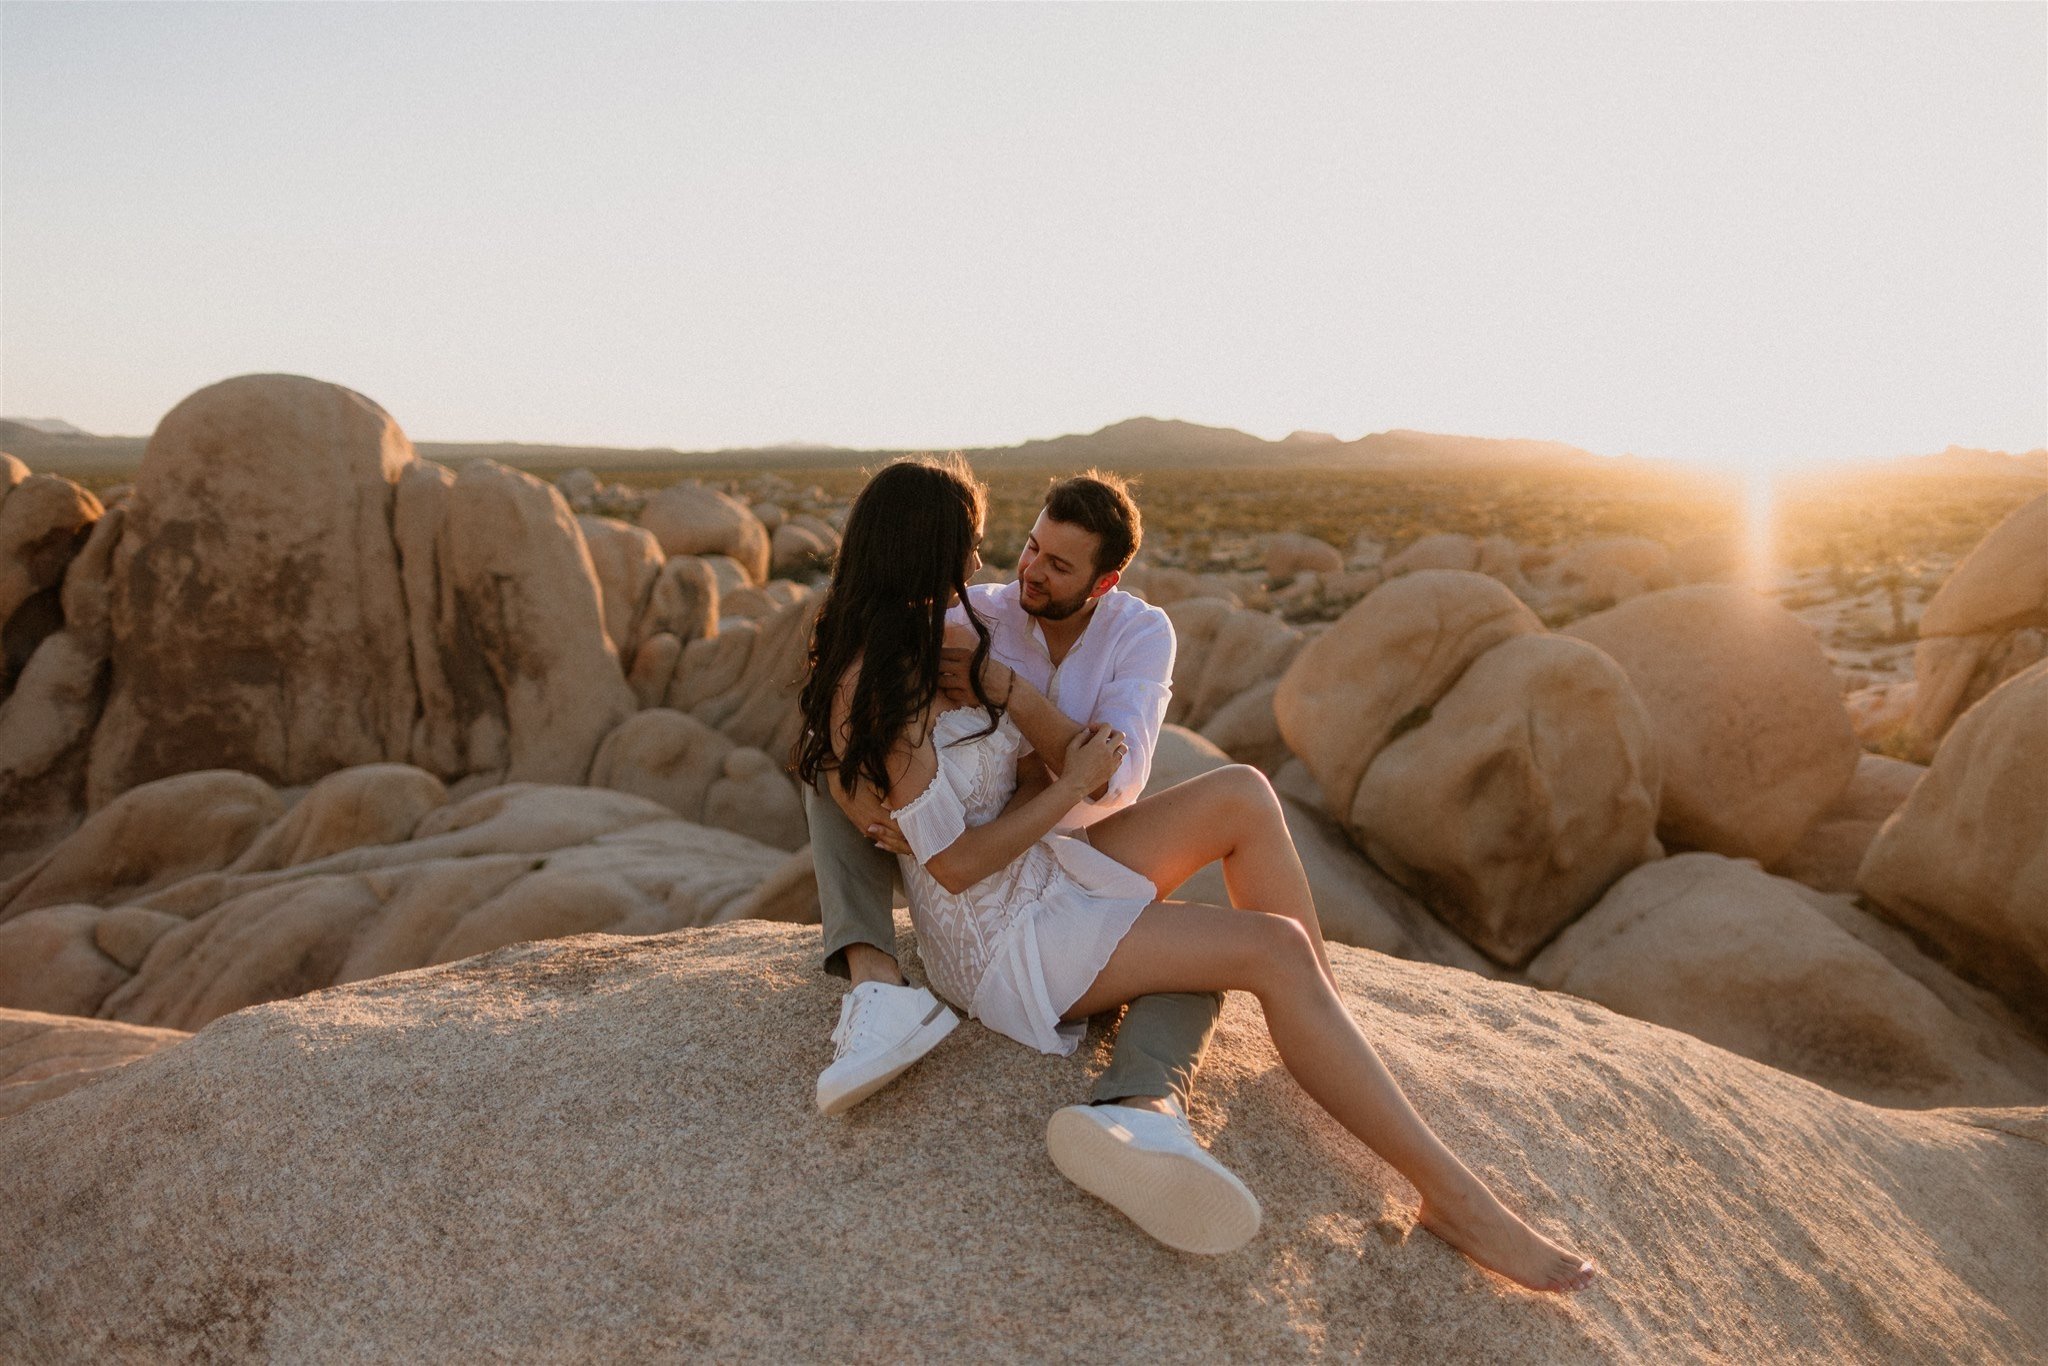 Joshua Tree Couples Session Surprise Proposal - Will Khoury Photography_39.jpg